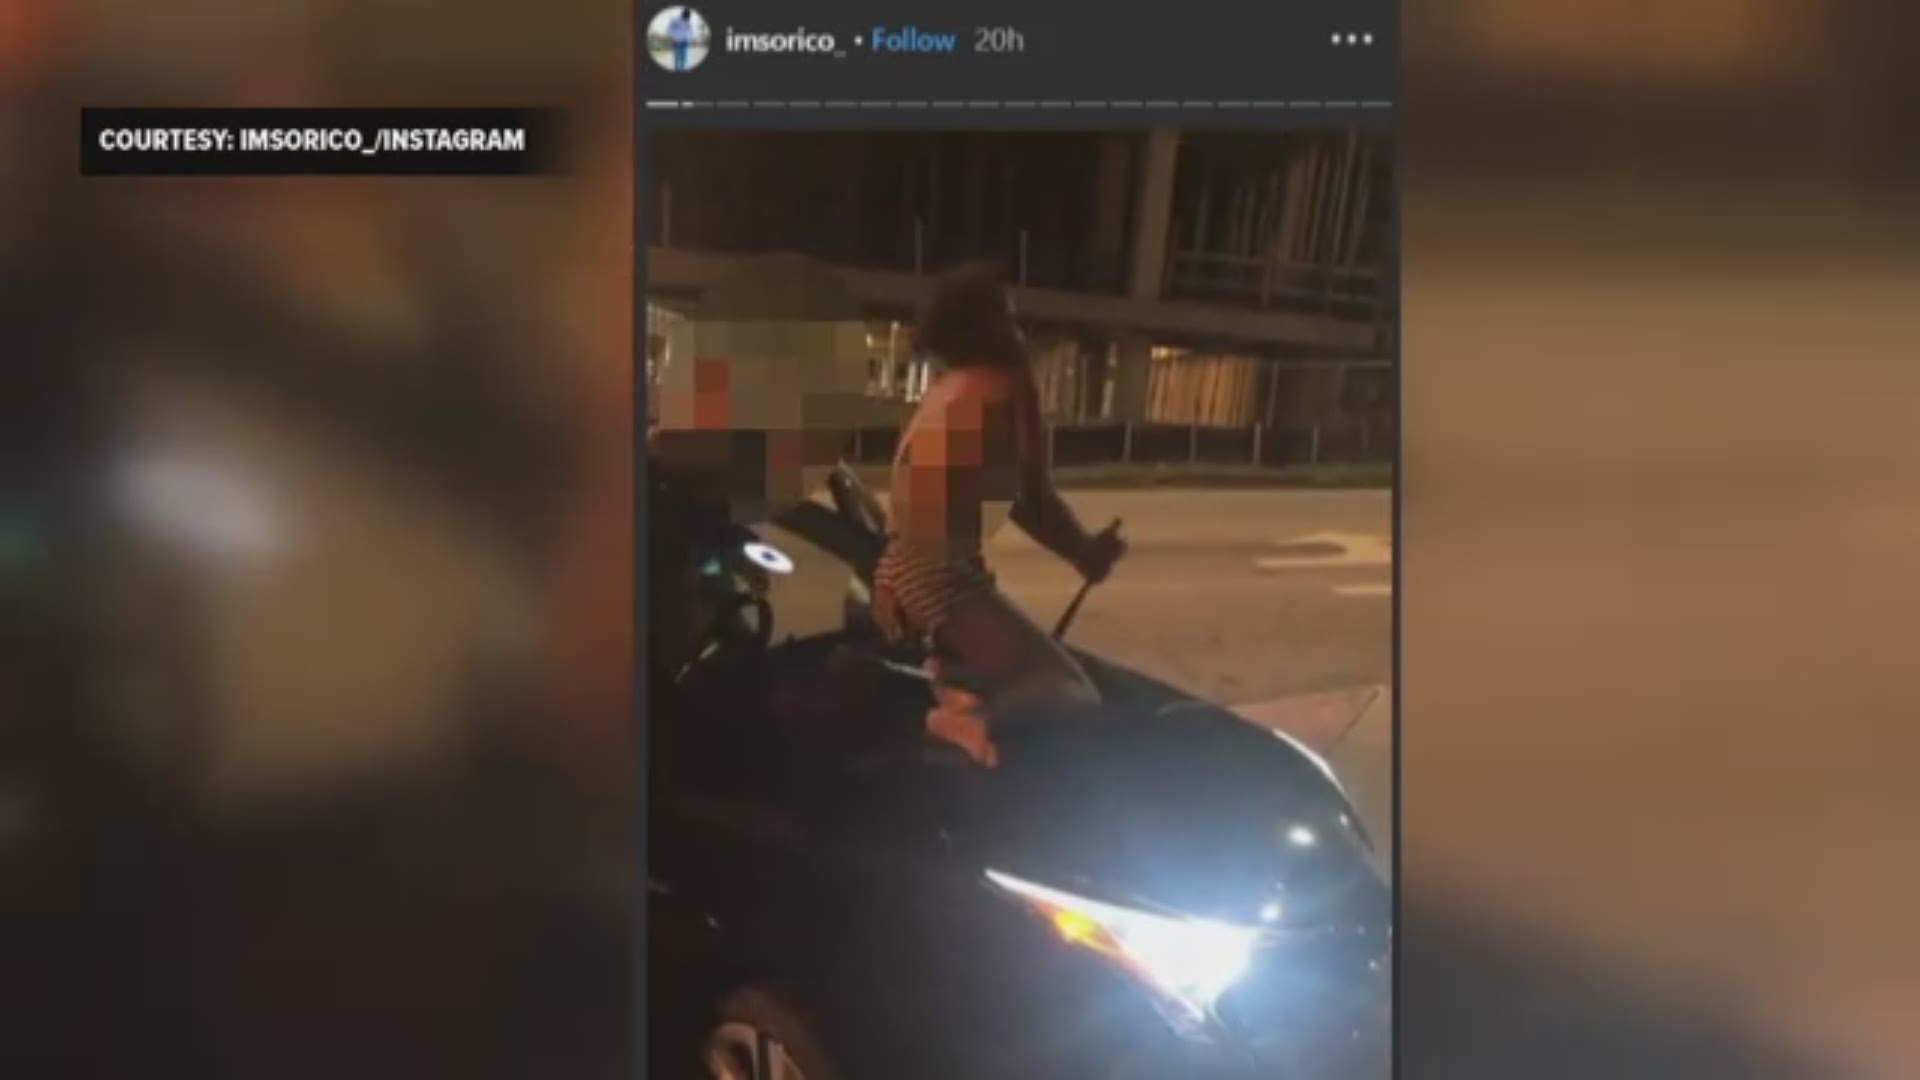 In the video recorded by bystanders, you see the woman on the hood of the man's car and the man yelling "get off my car!"